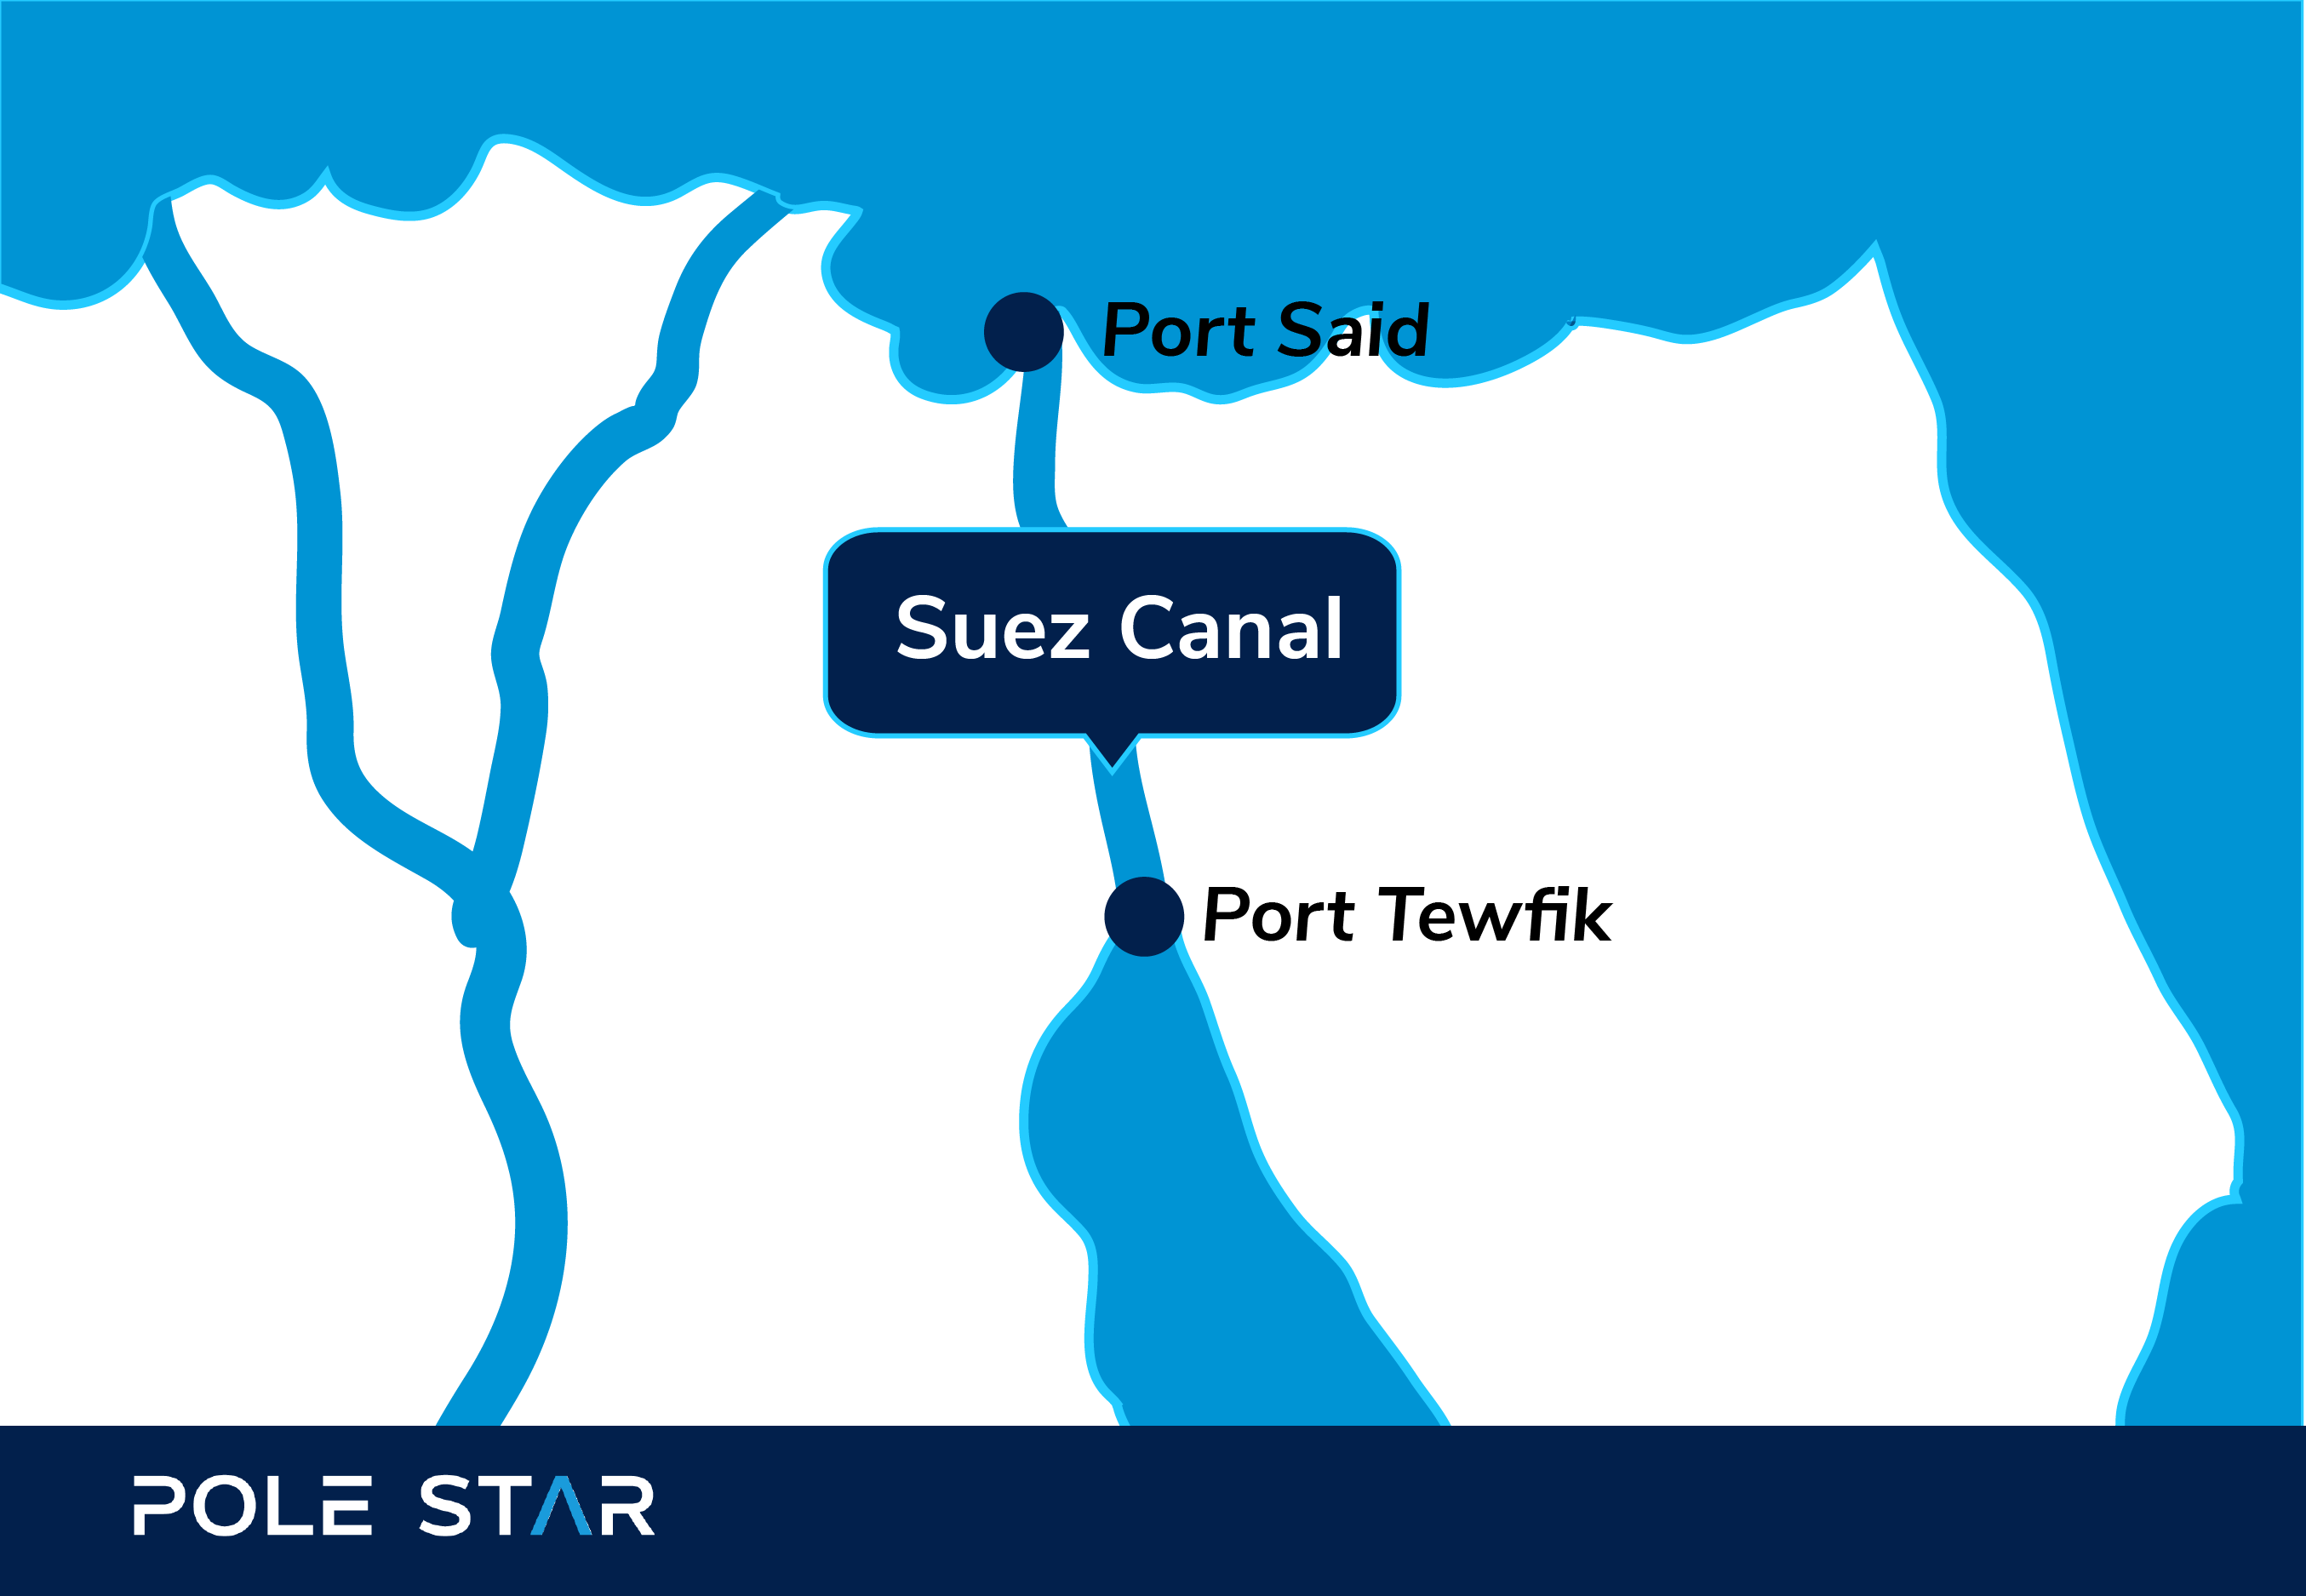 Suez canal map - begins in Port Said and finished in Port Tewfik